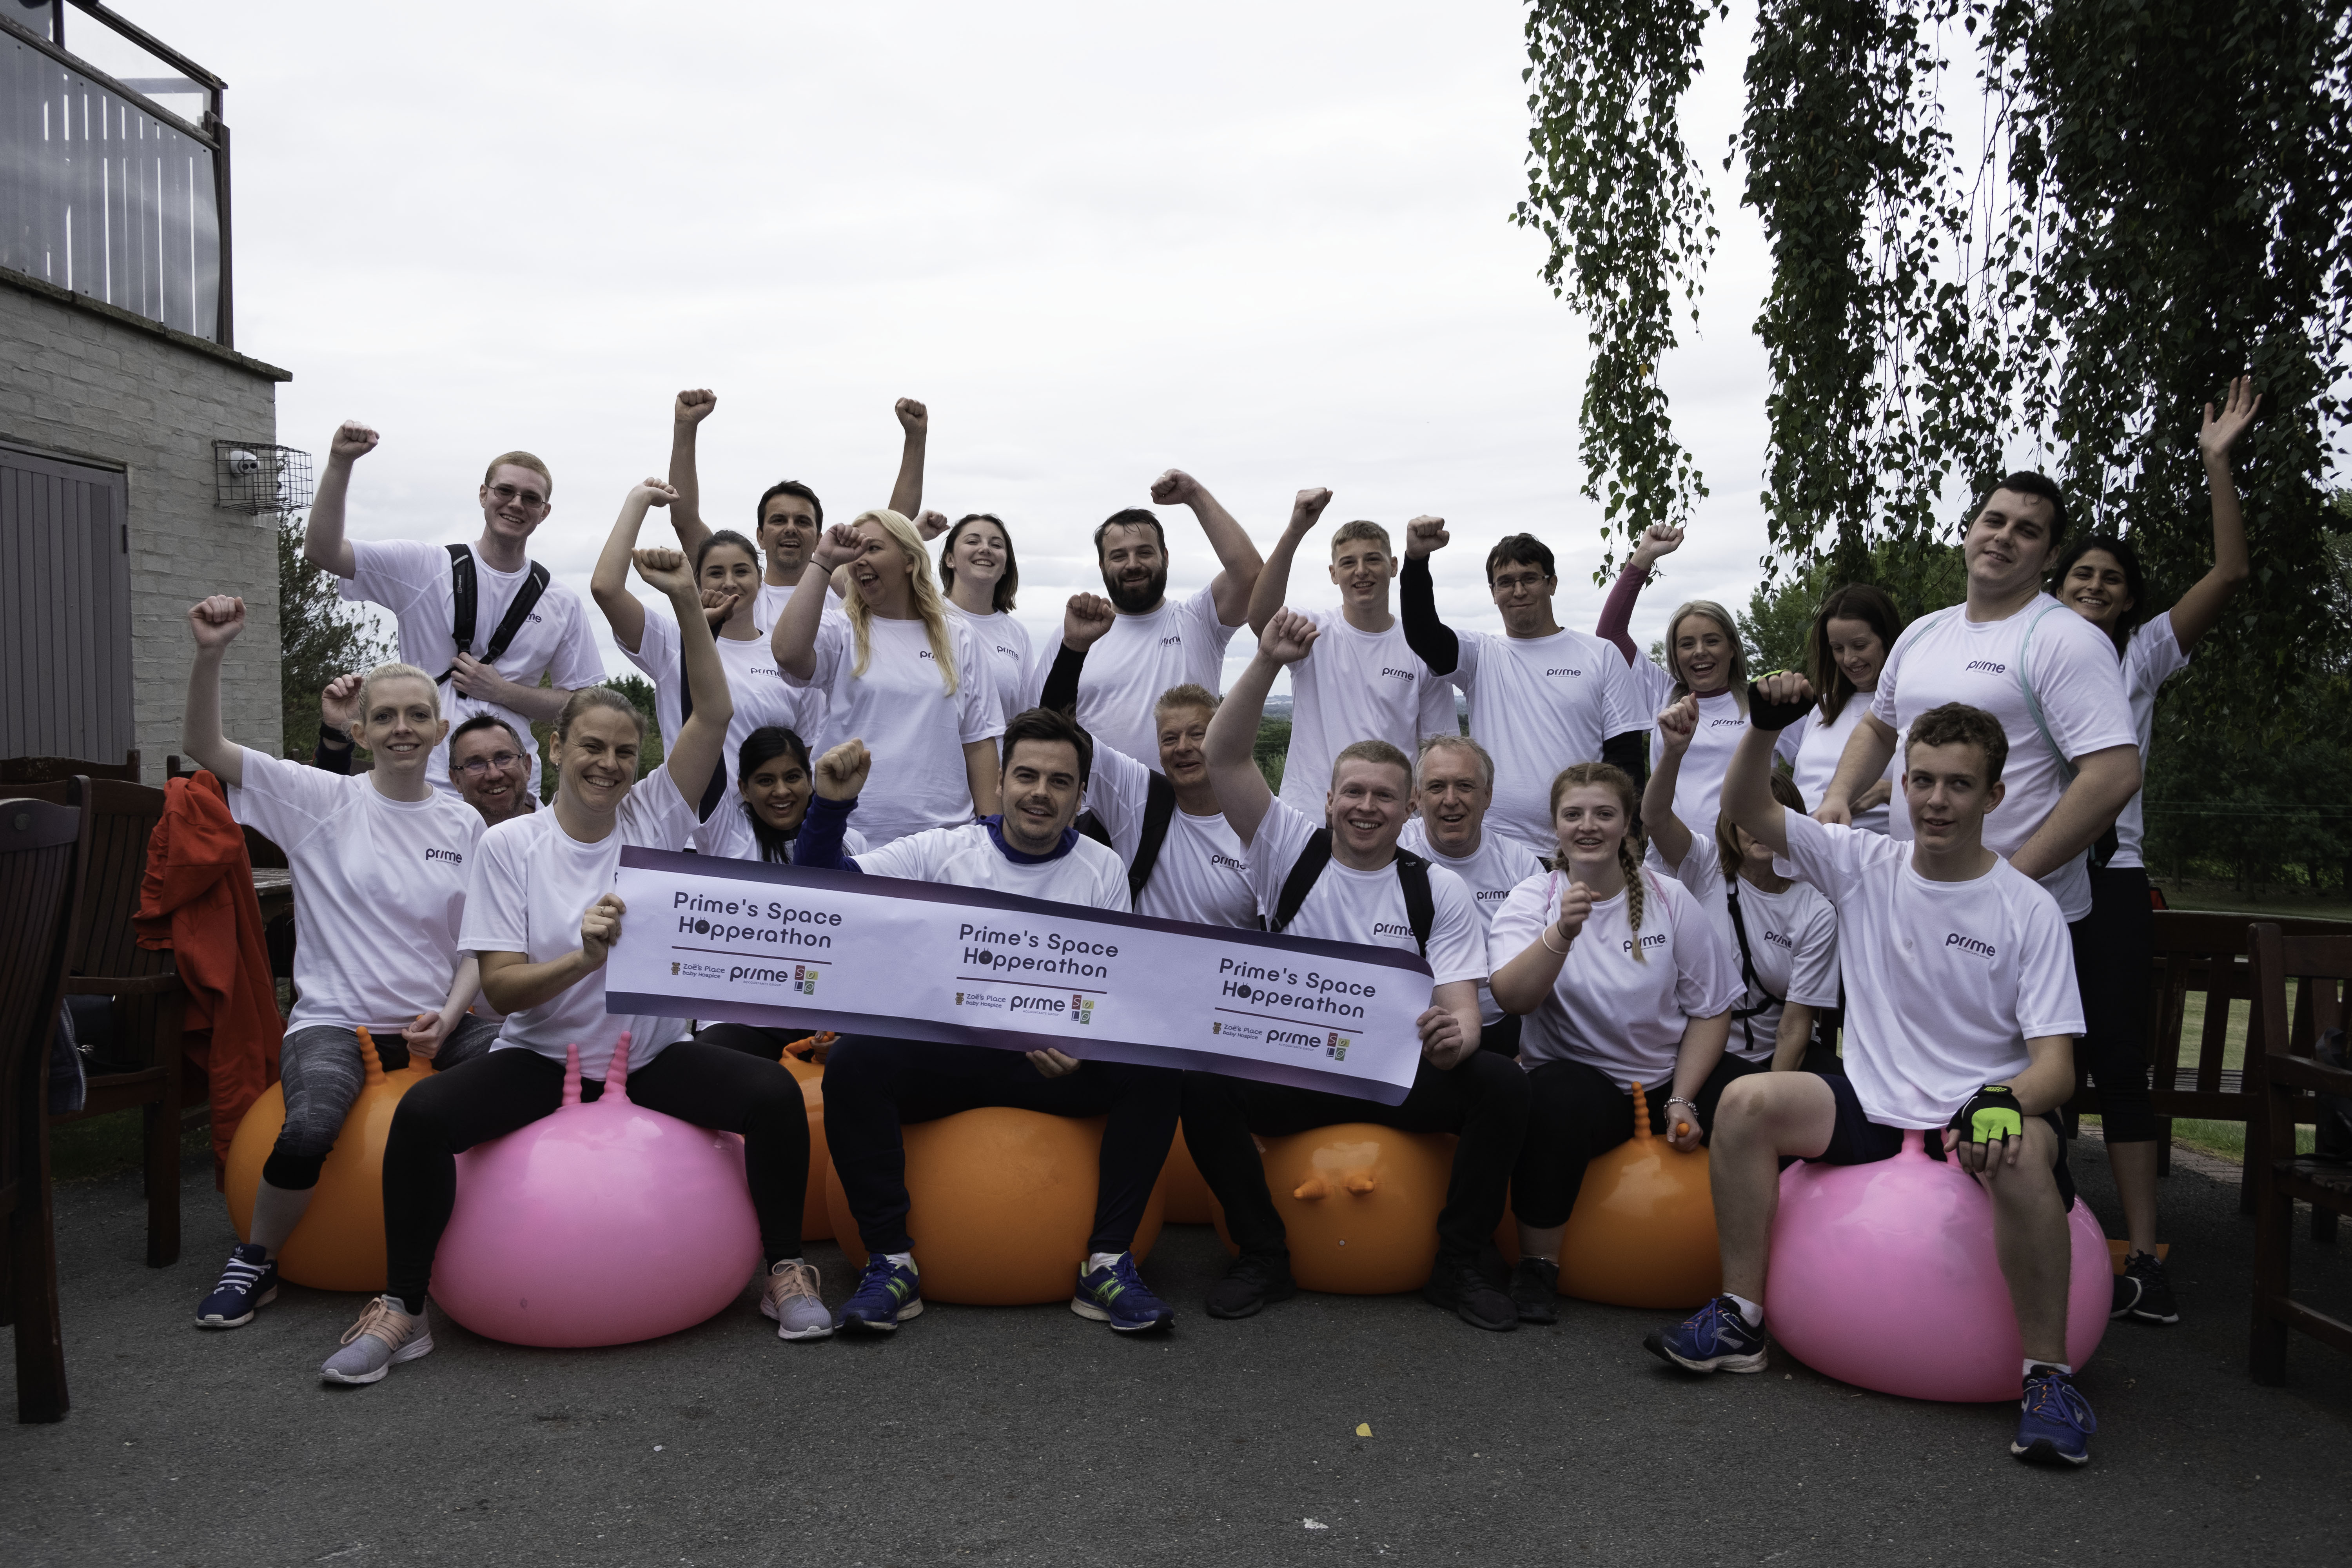 Image for Prime Accountants Group Space Hopperathon